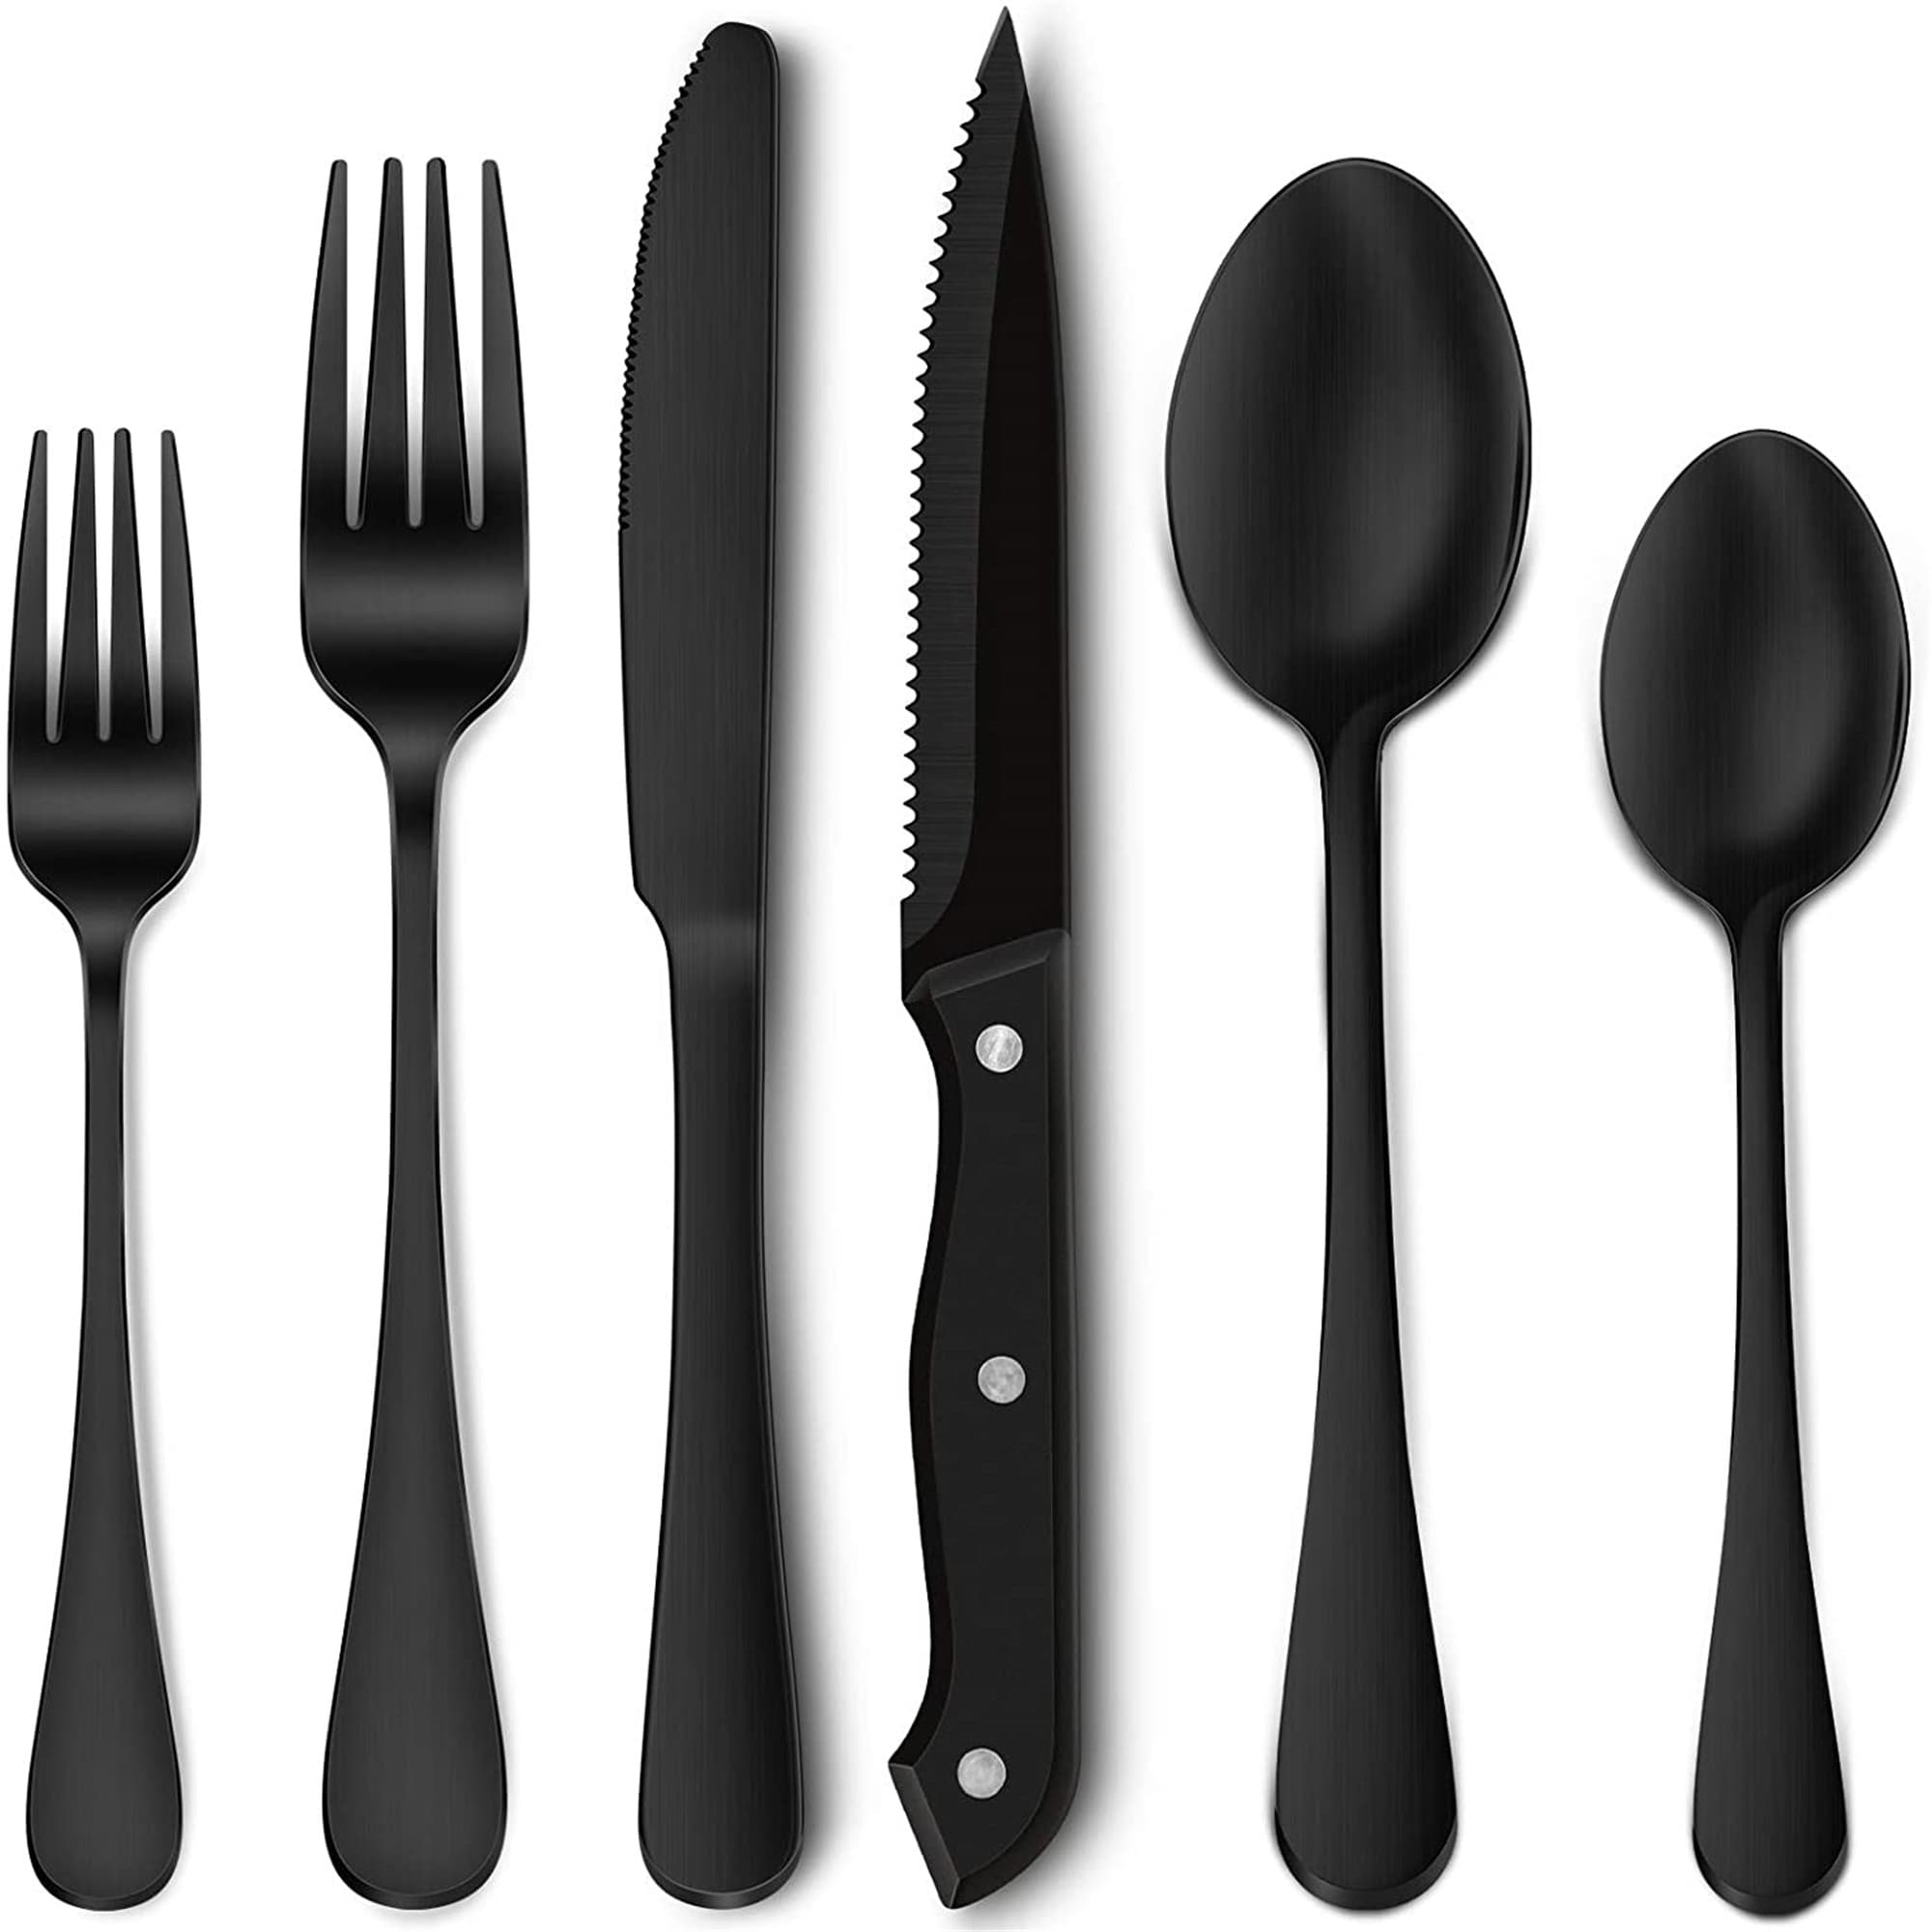 HIWARE Corrosion Resistant Stainless Steel Cutlery Set, 48-Piece